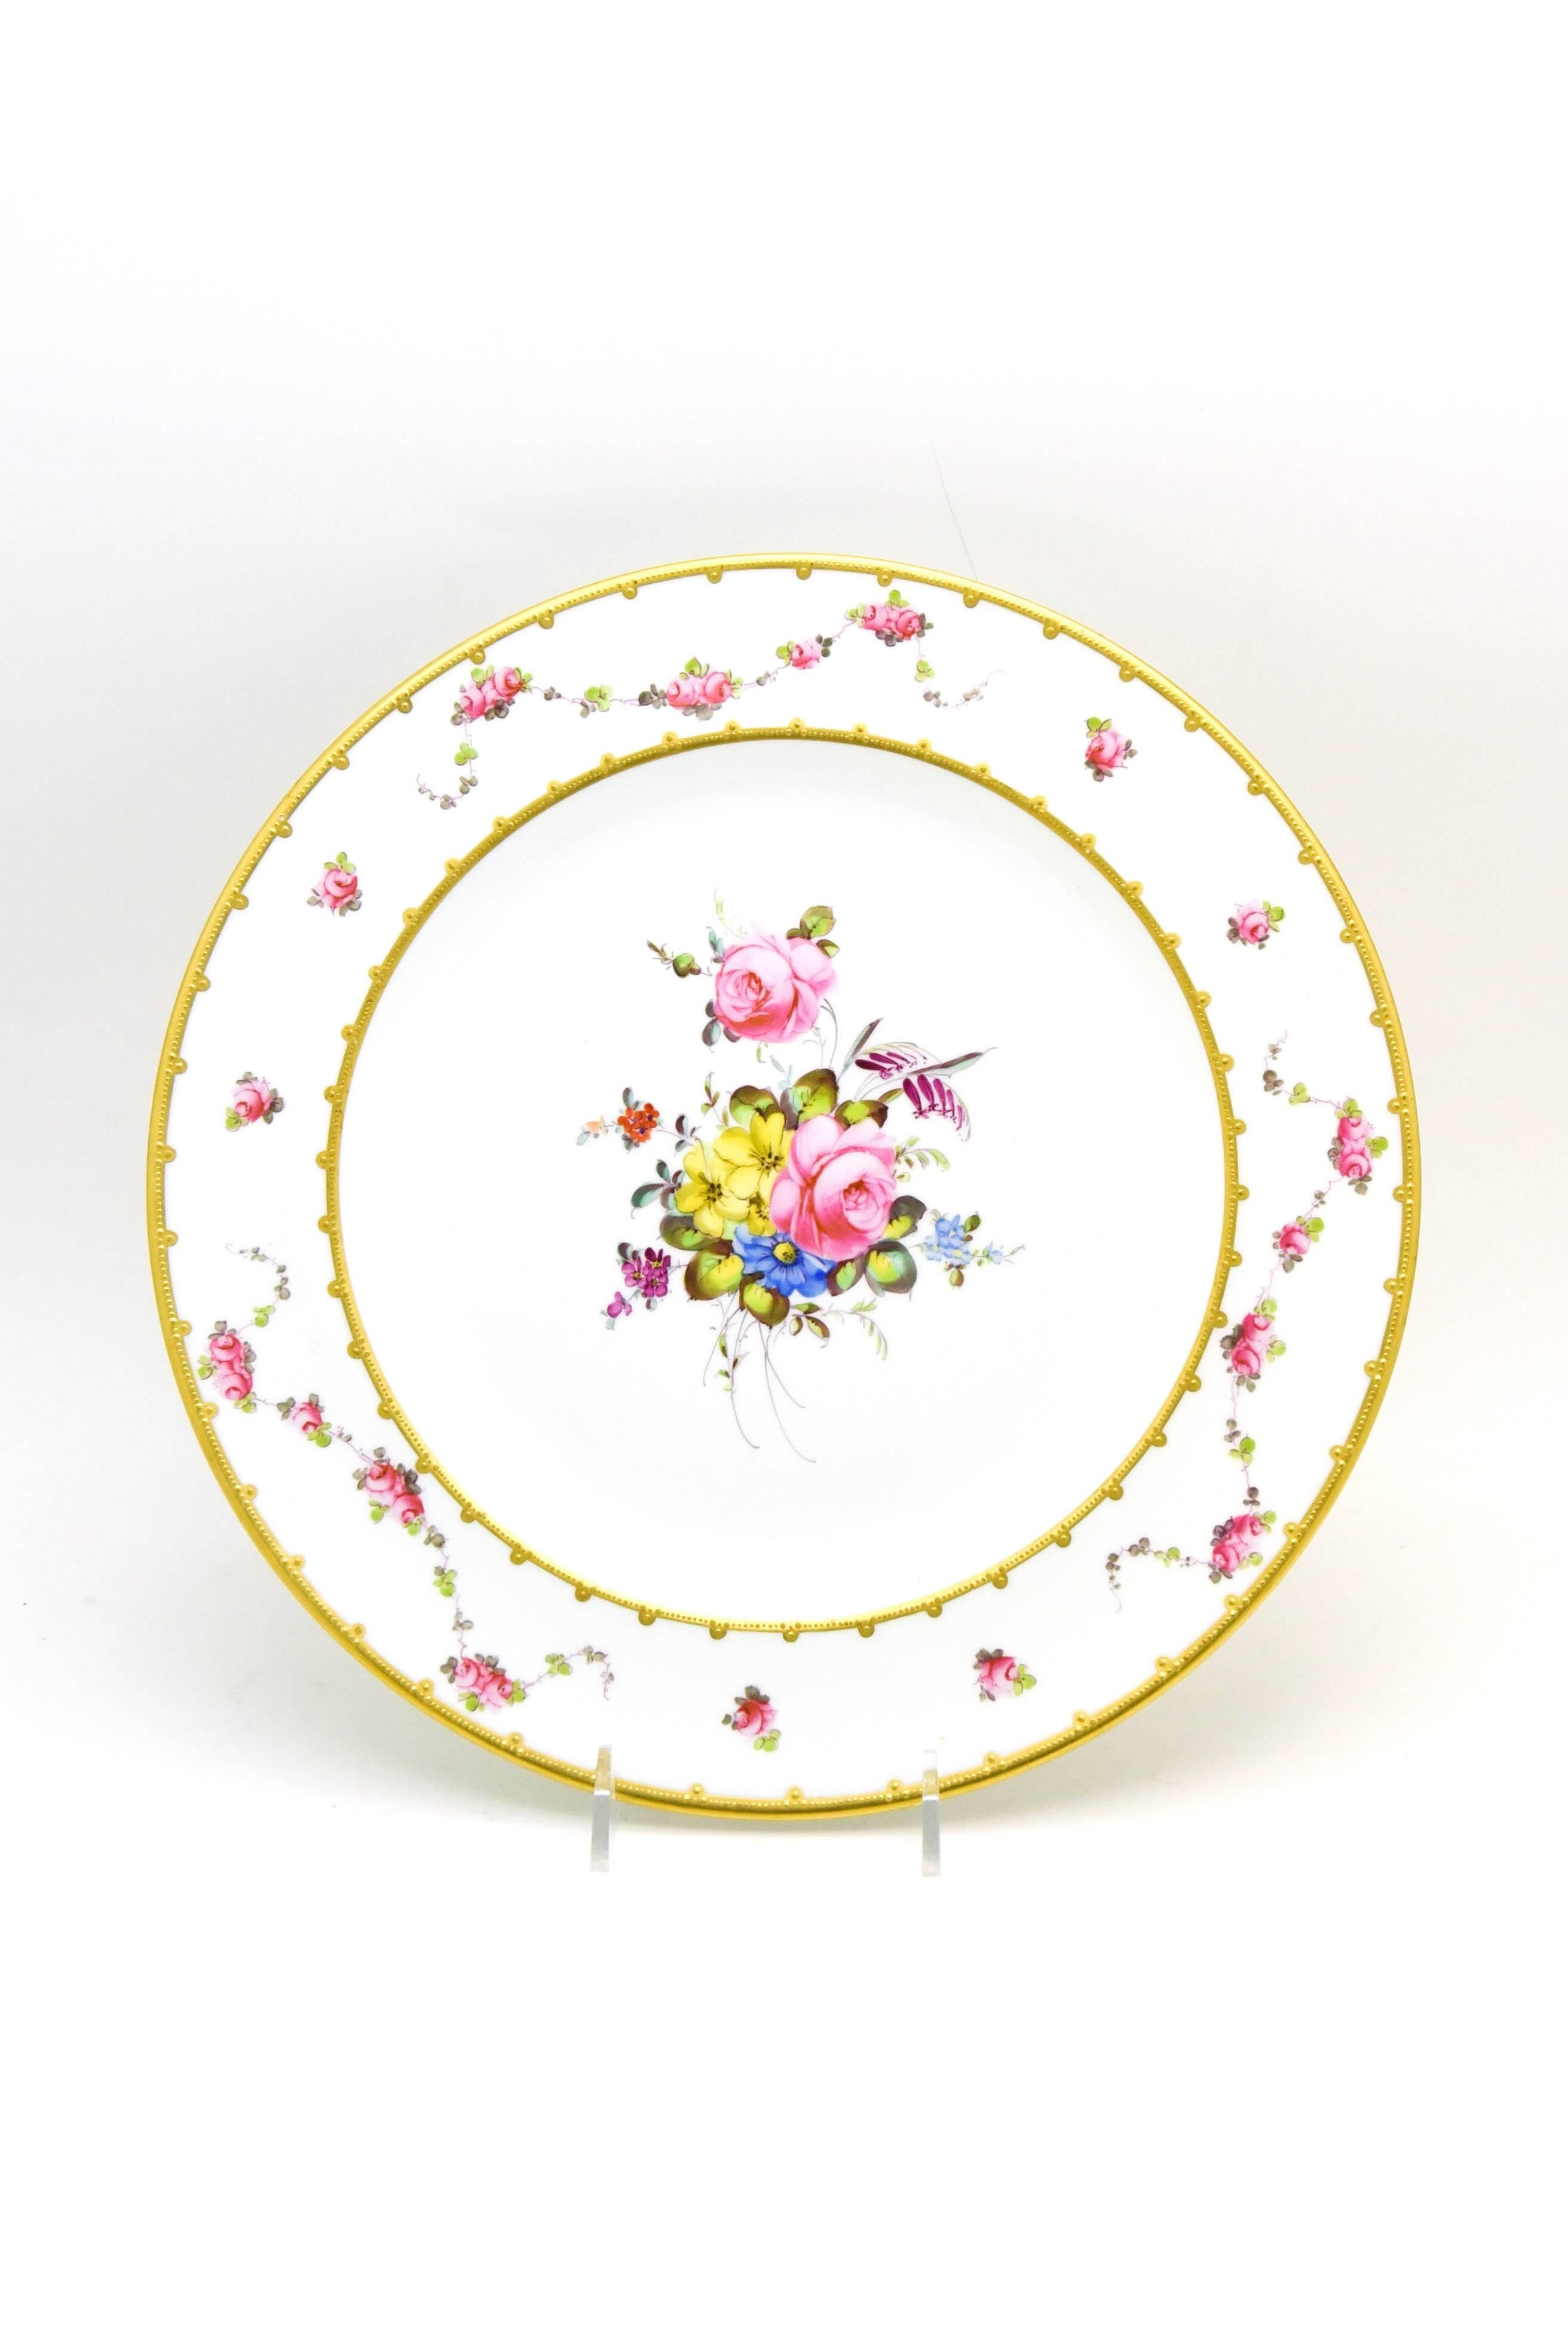 Set of 12 Royal Crown Derby Hand-Painted Dinner Plates with Floral Bouquets In Excellent Condition For Sale In Great Barrington, MA